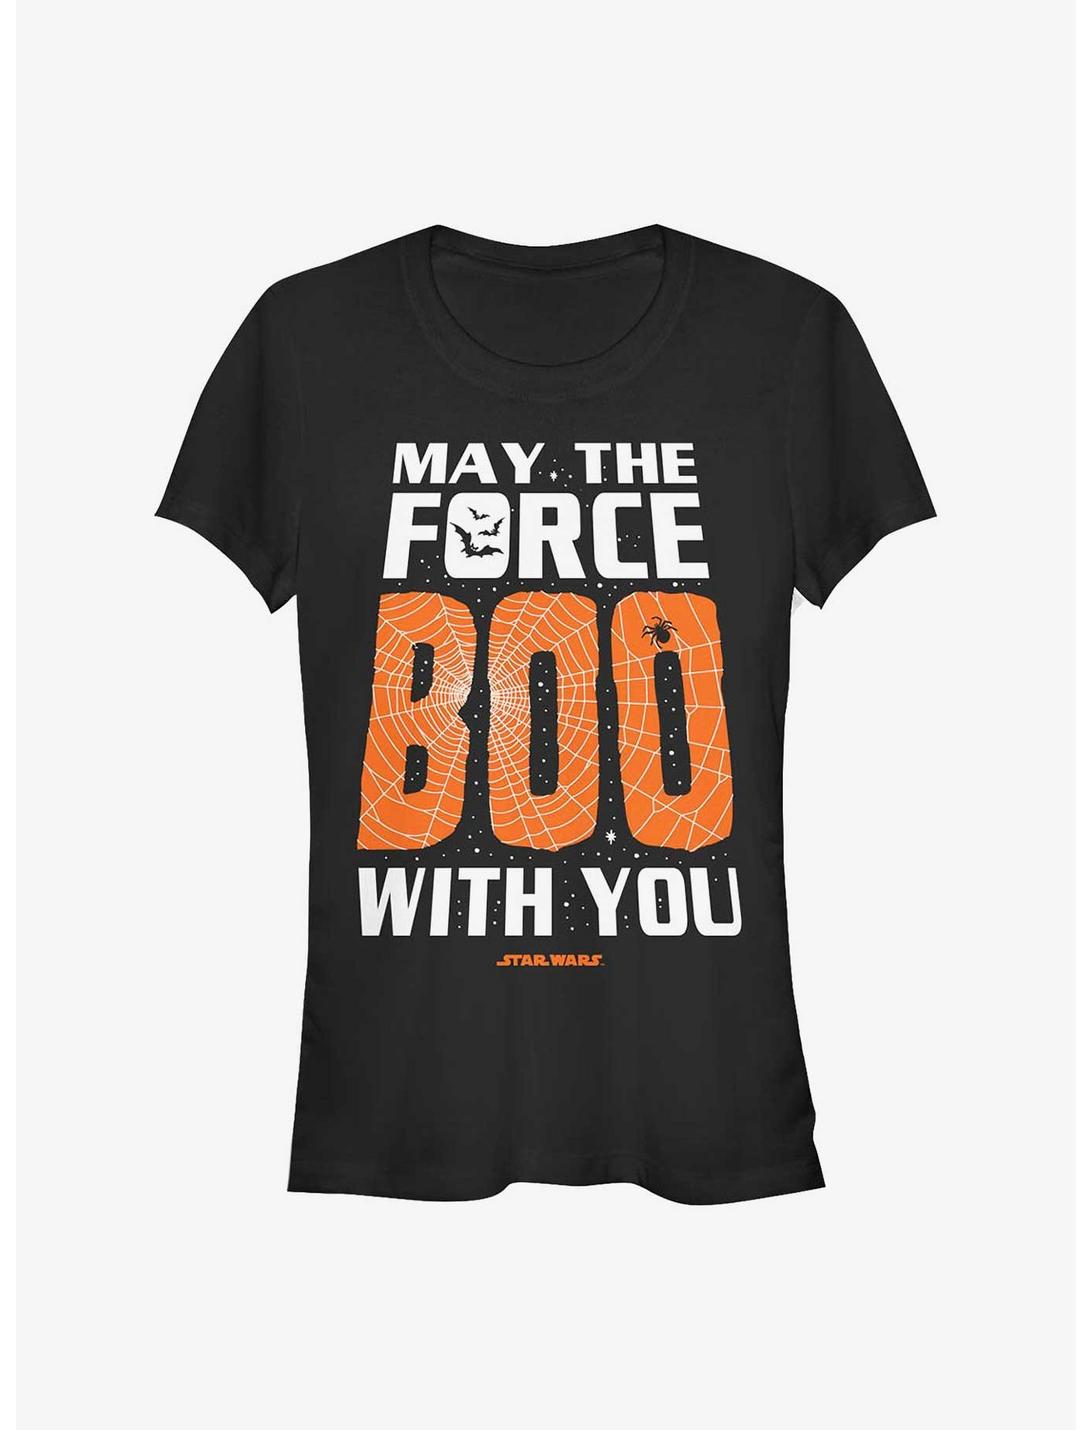 Star Wars Boo With You Halloween Girls T-Shirt, BLACK, hi-res